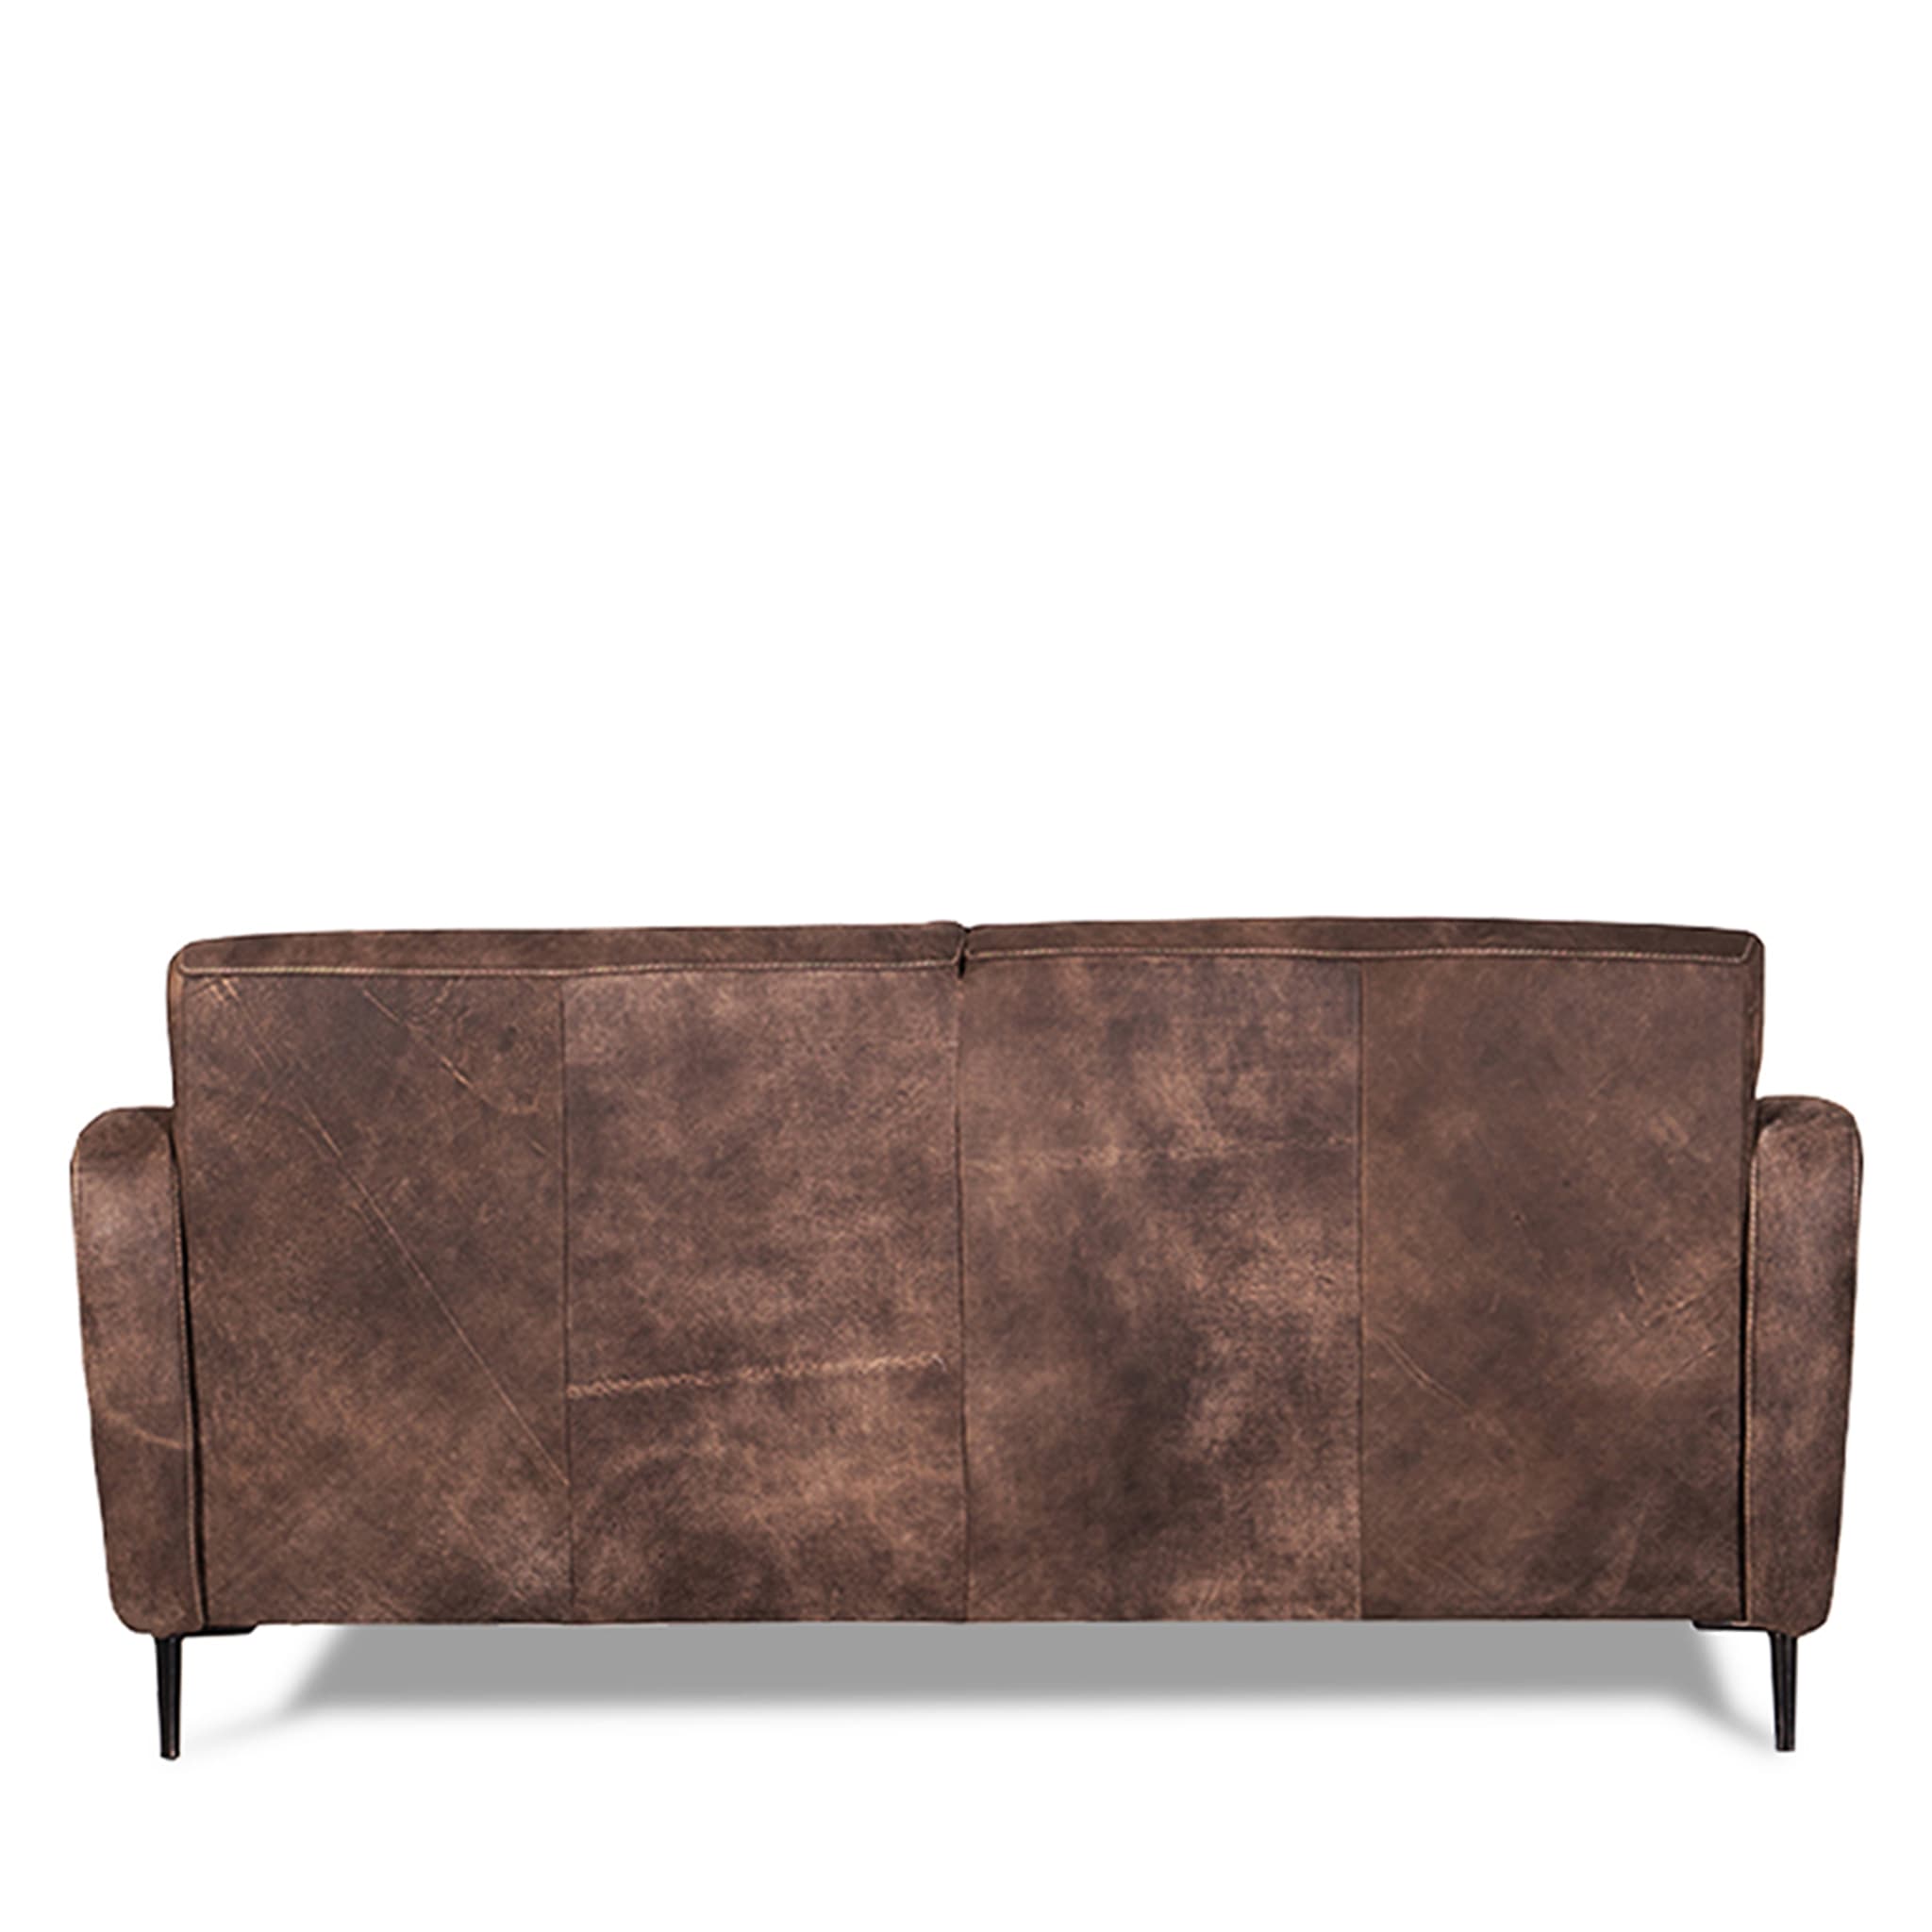 Fonzie Brown Leather 2-Seater Sofa Tribeca Collection - Alternative view 3